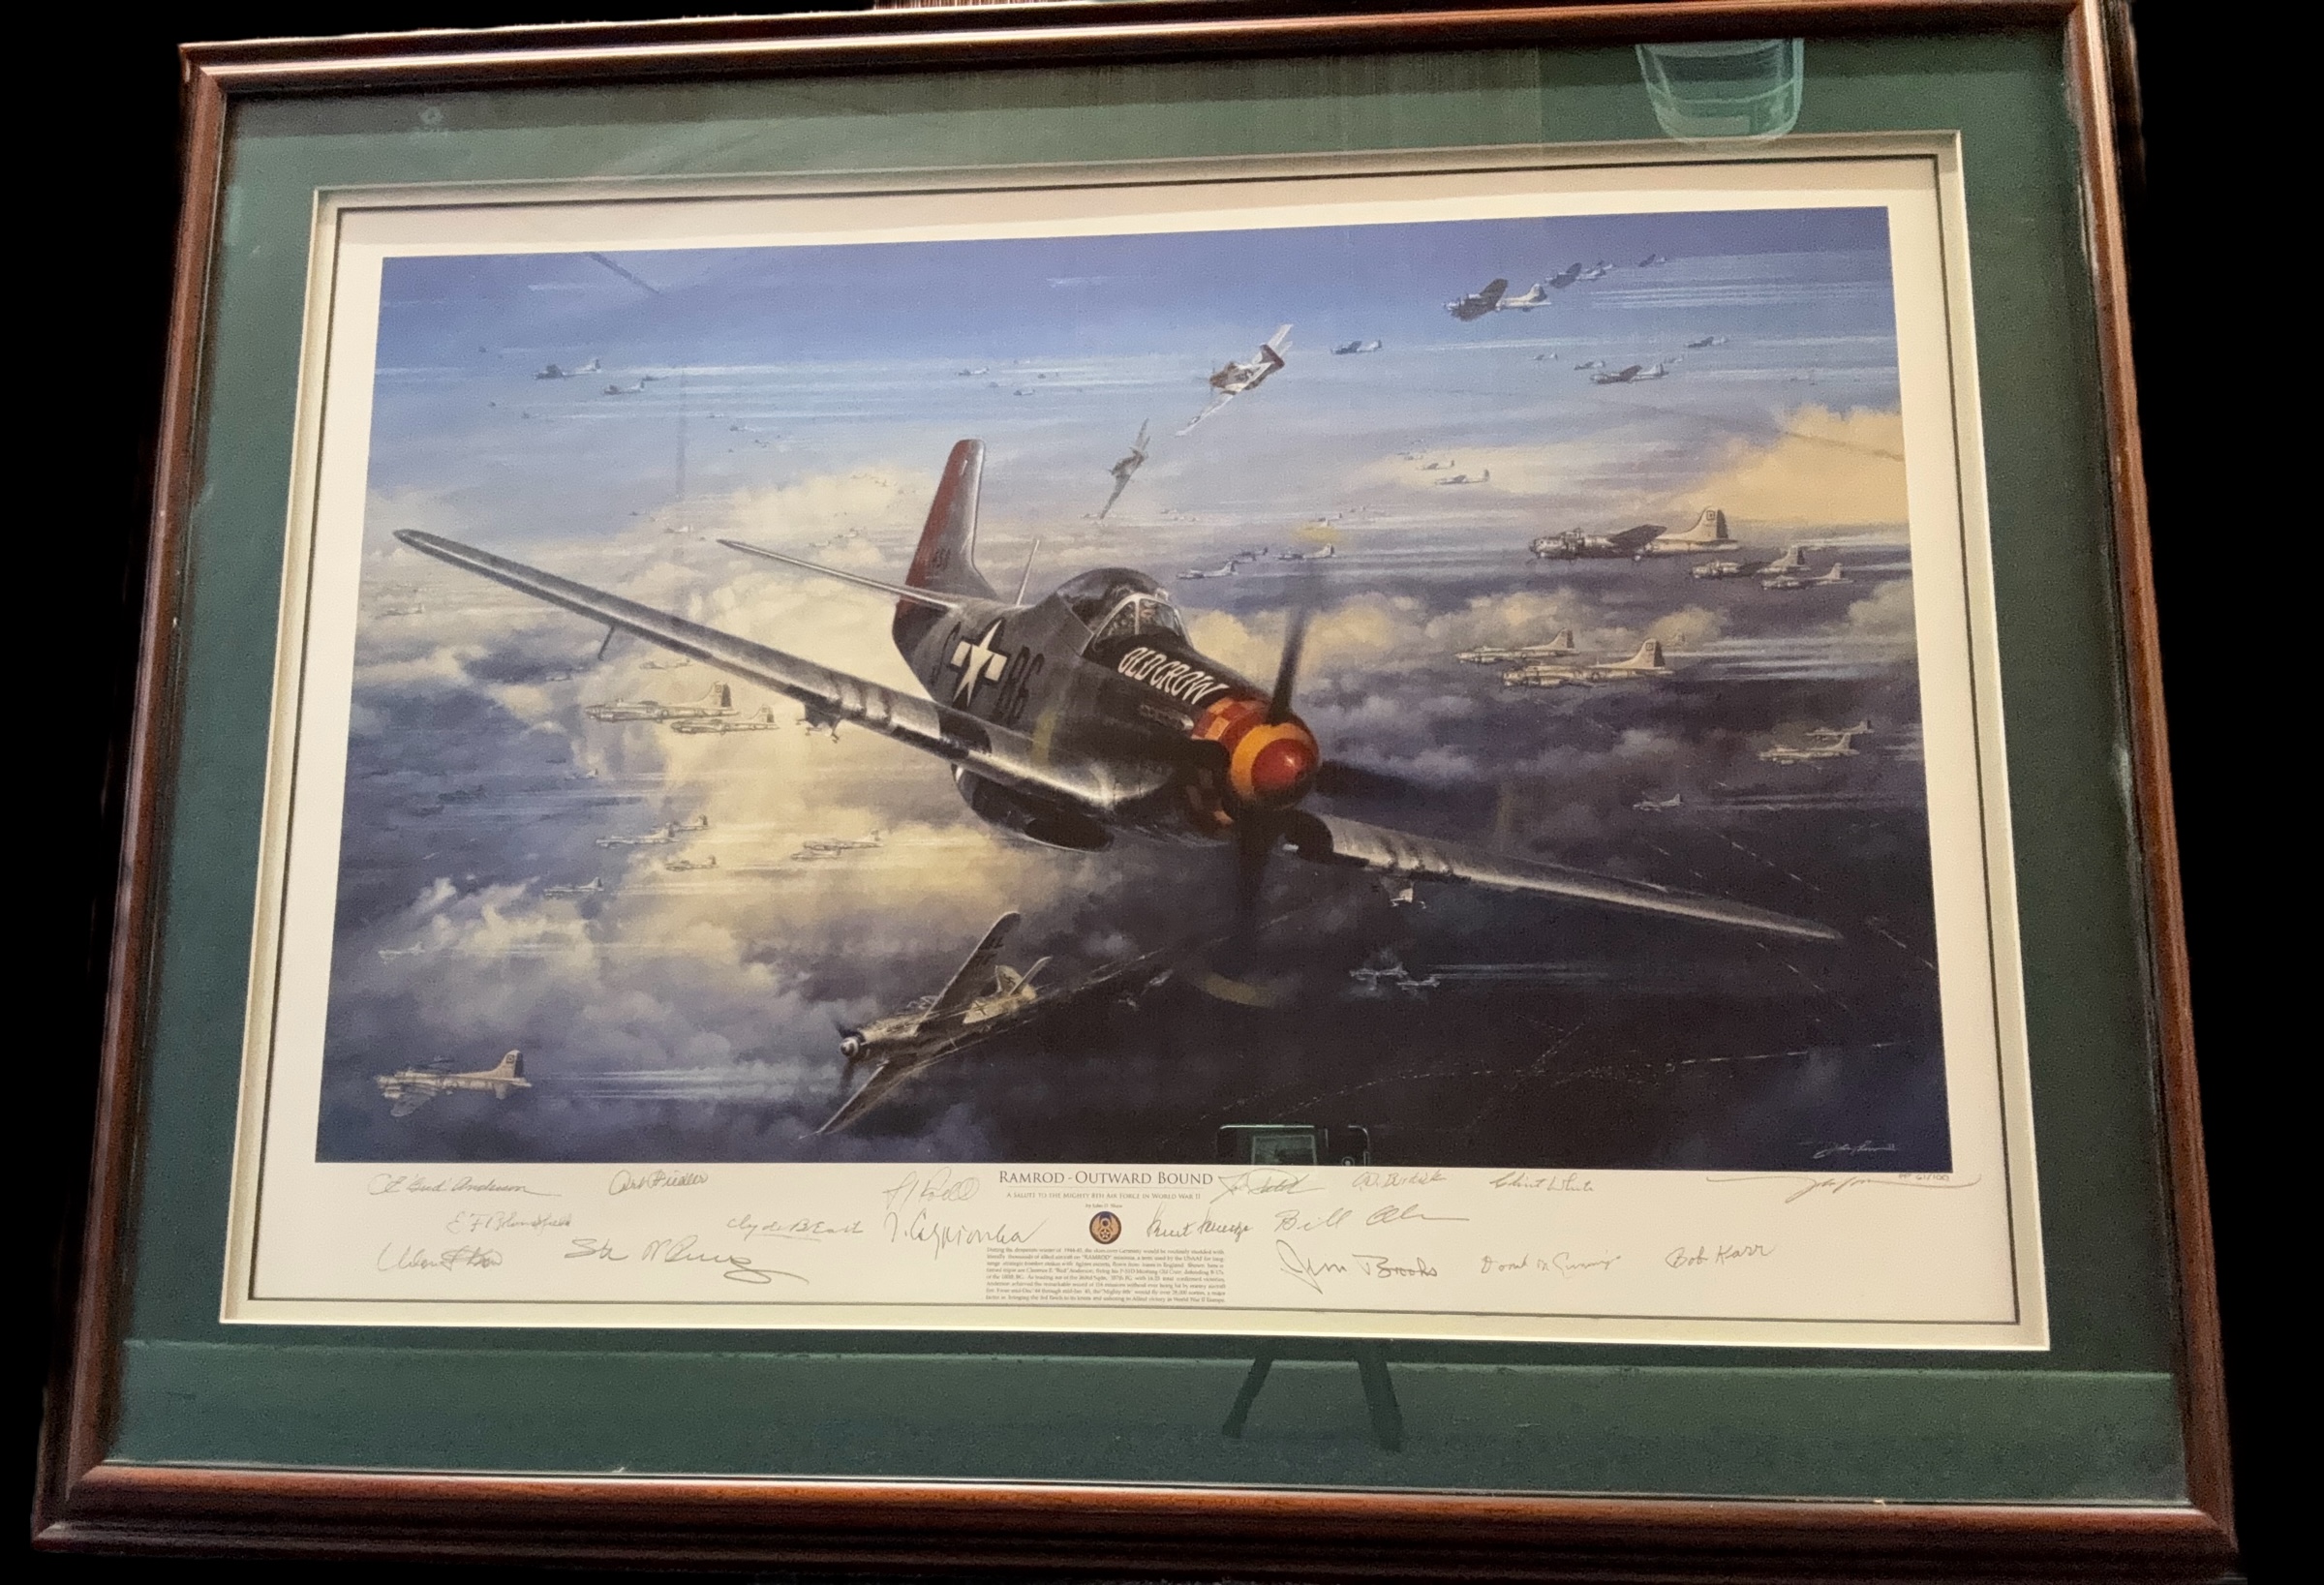 Ramrod - outward bound colour print. During the winter of 1944 - '45, the skies over Germany would